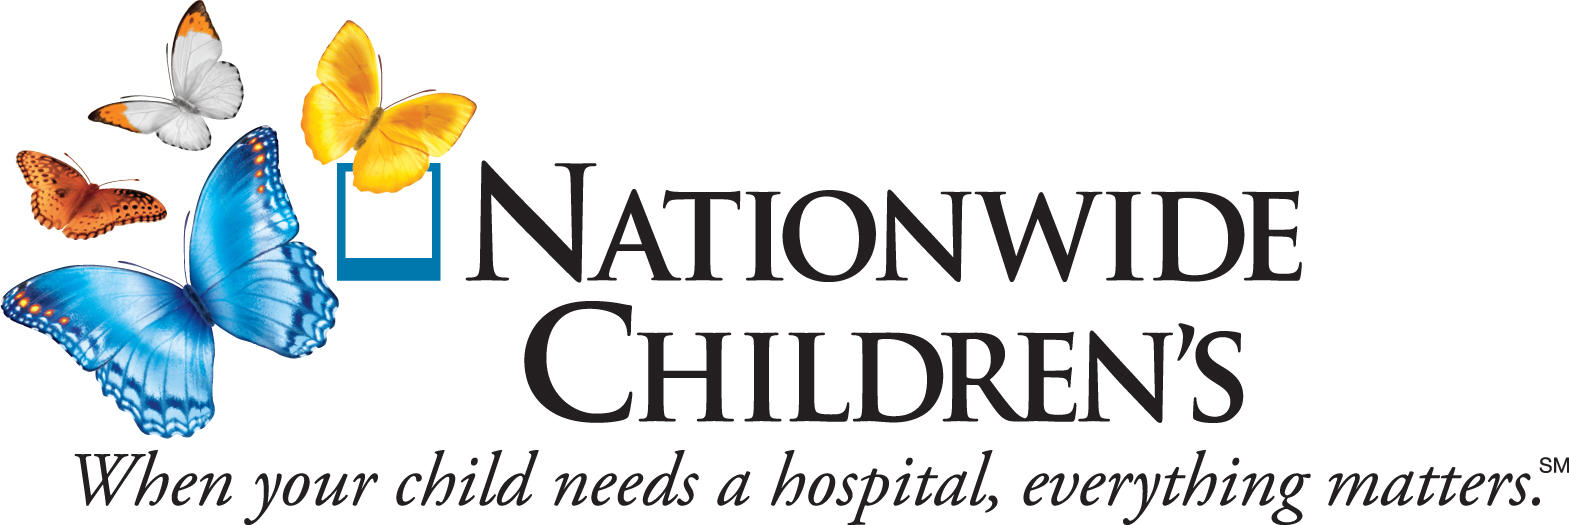 Nationwide-Childrens-Hospital-and-Research-Institute-1585417162.jpg